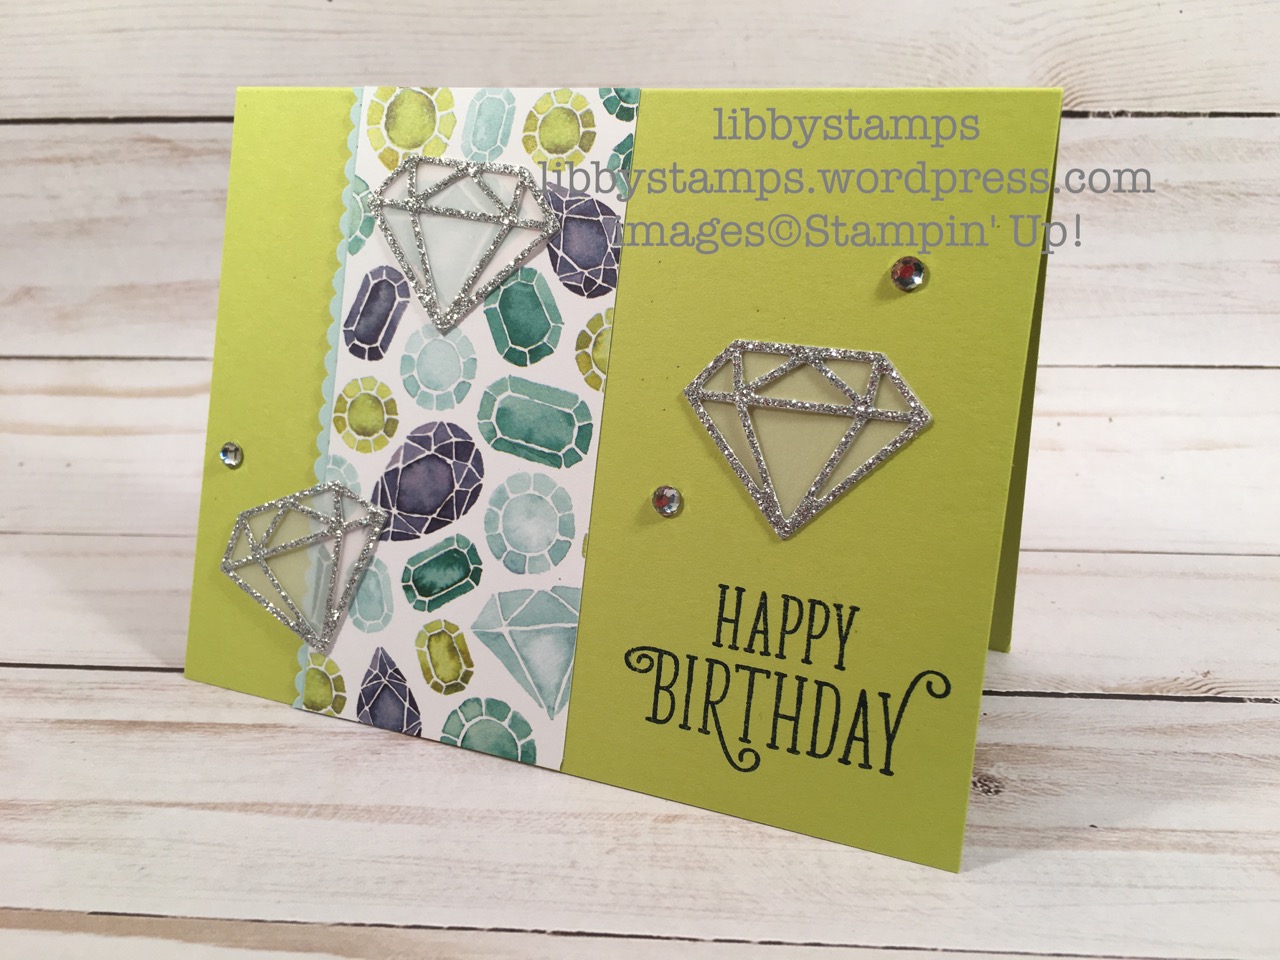 libbystamps, stampin up, Happy Birthday Gorgeous, Eclectic Layers Thinlits, Naturally Eclectic DSP, Decorative Ribbon Border Punch, Decorative Ribbon Border Punch, WWC